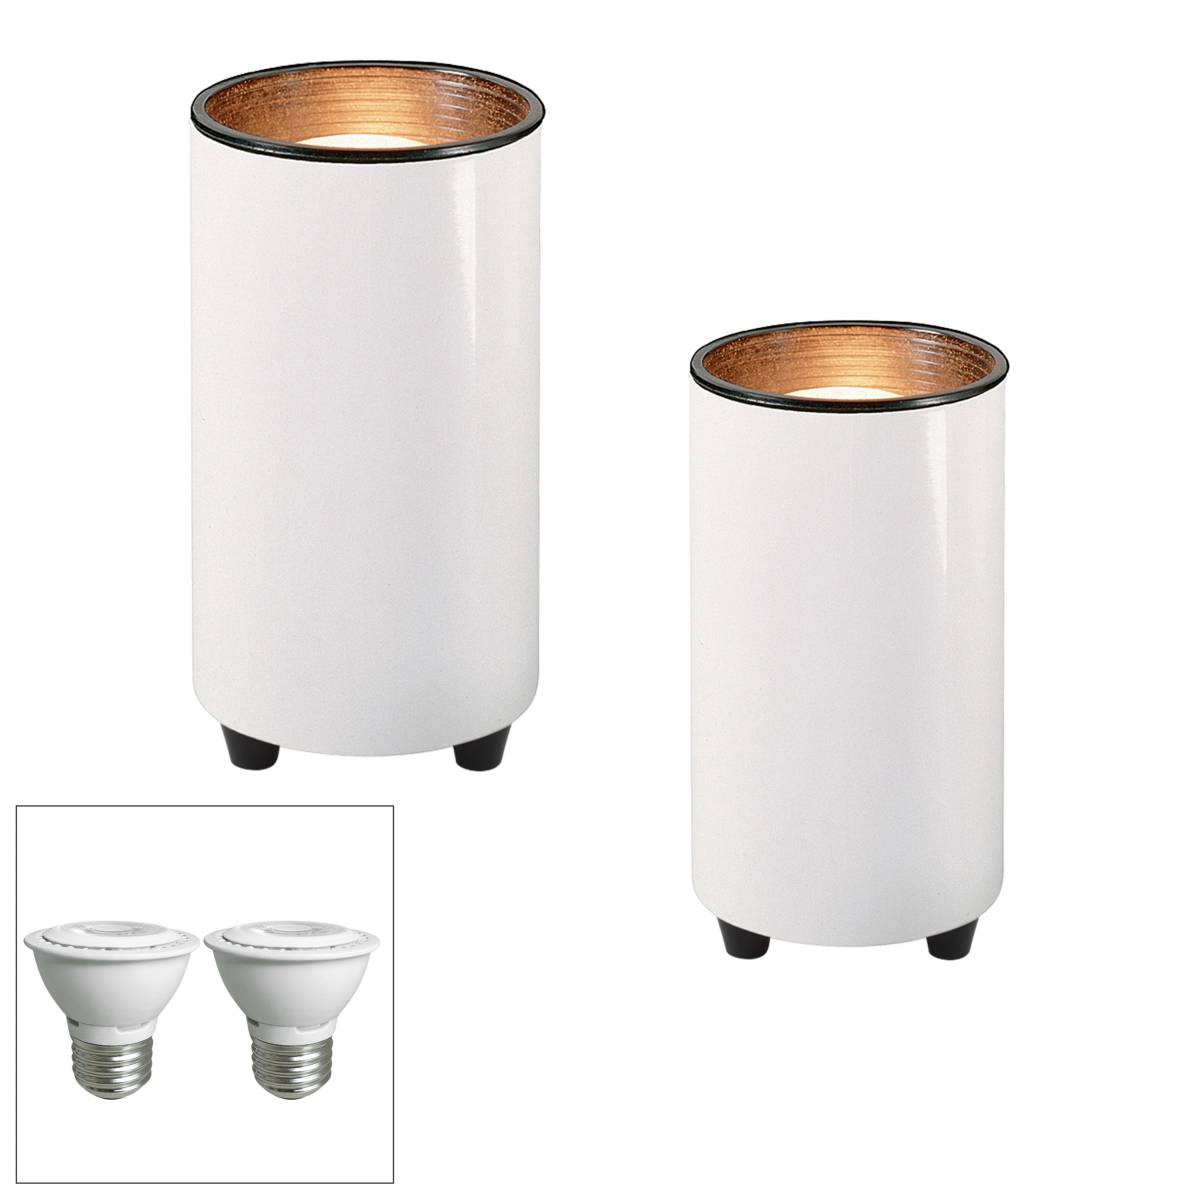 https://image.lampsplus.com/is/image/b9gt8/white-6-and-one-half-high-led-mini-can-accent-spot-light-set-of-2__43w23.jpg?qlt=70&wid=1200&hei=1200&fmt=jpeg